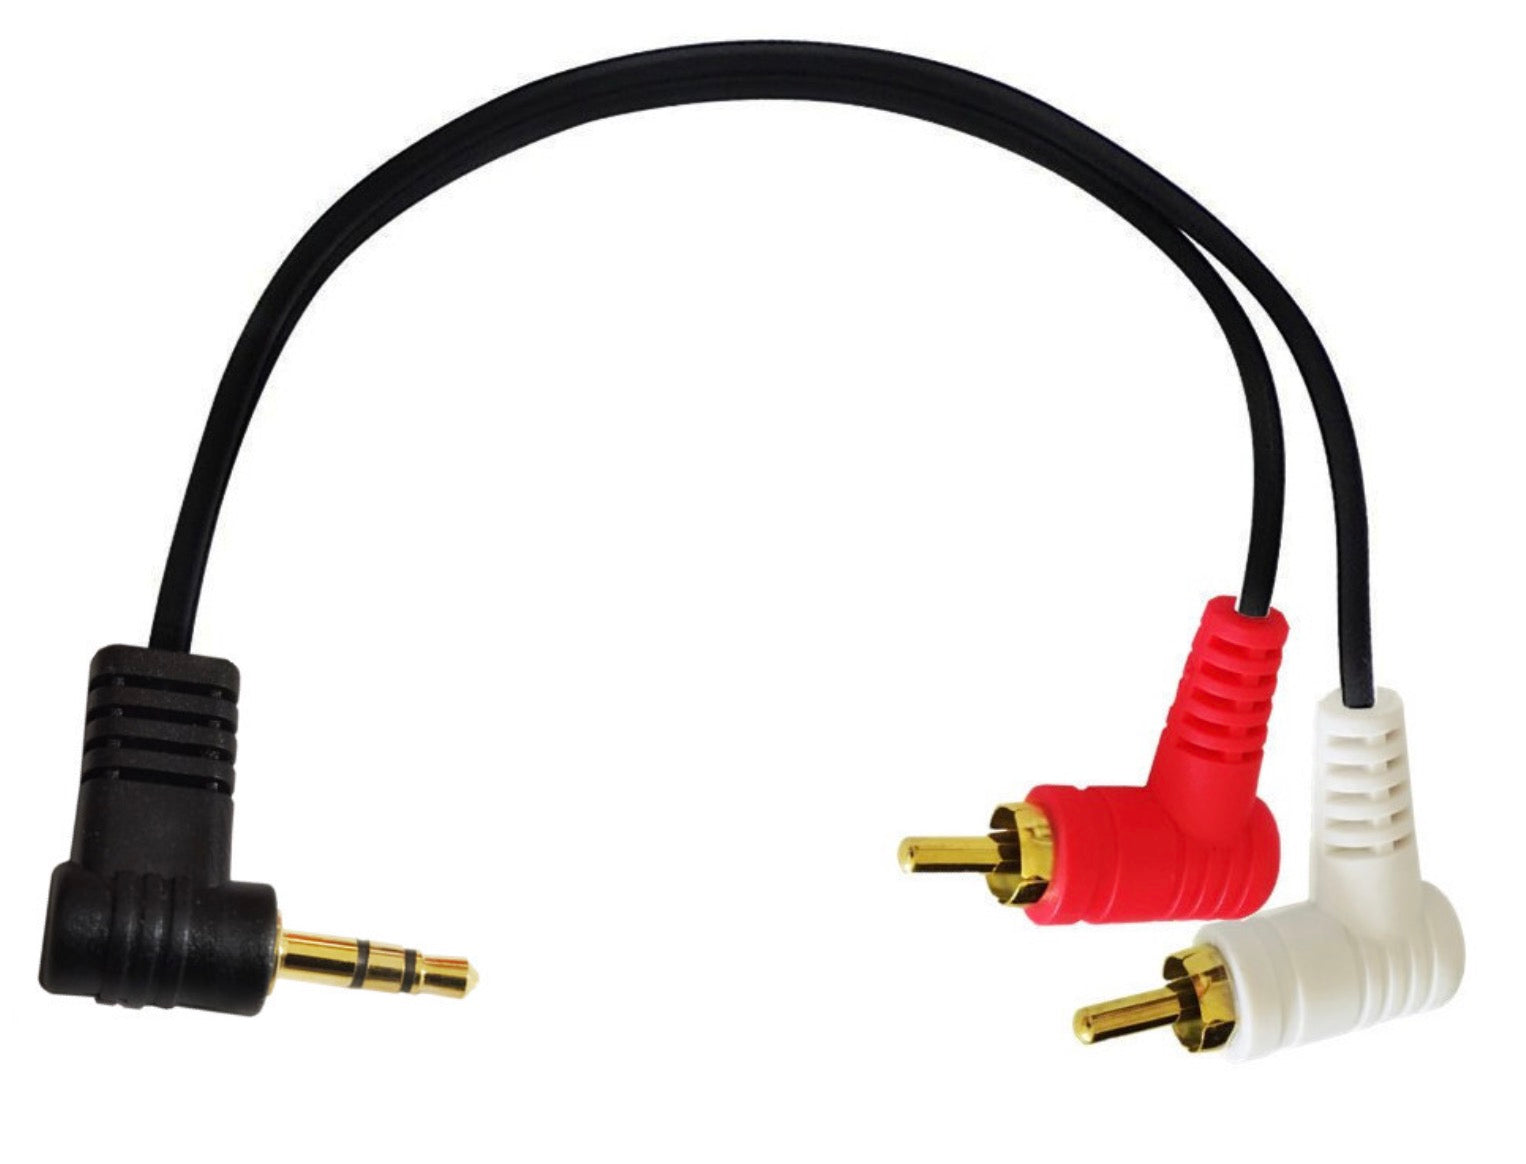 3.5mm 1/8 Stereo Mini Jack Male to 2 Male RCA Audio Splitter Cable